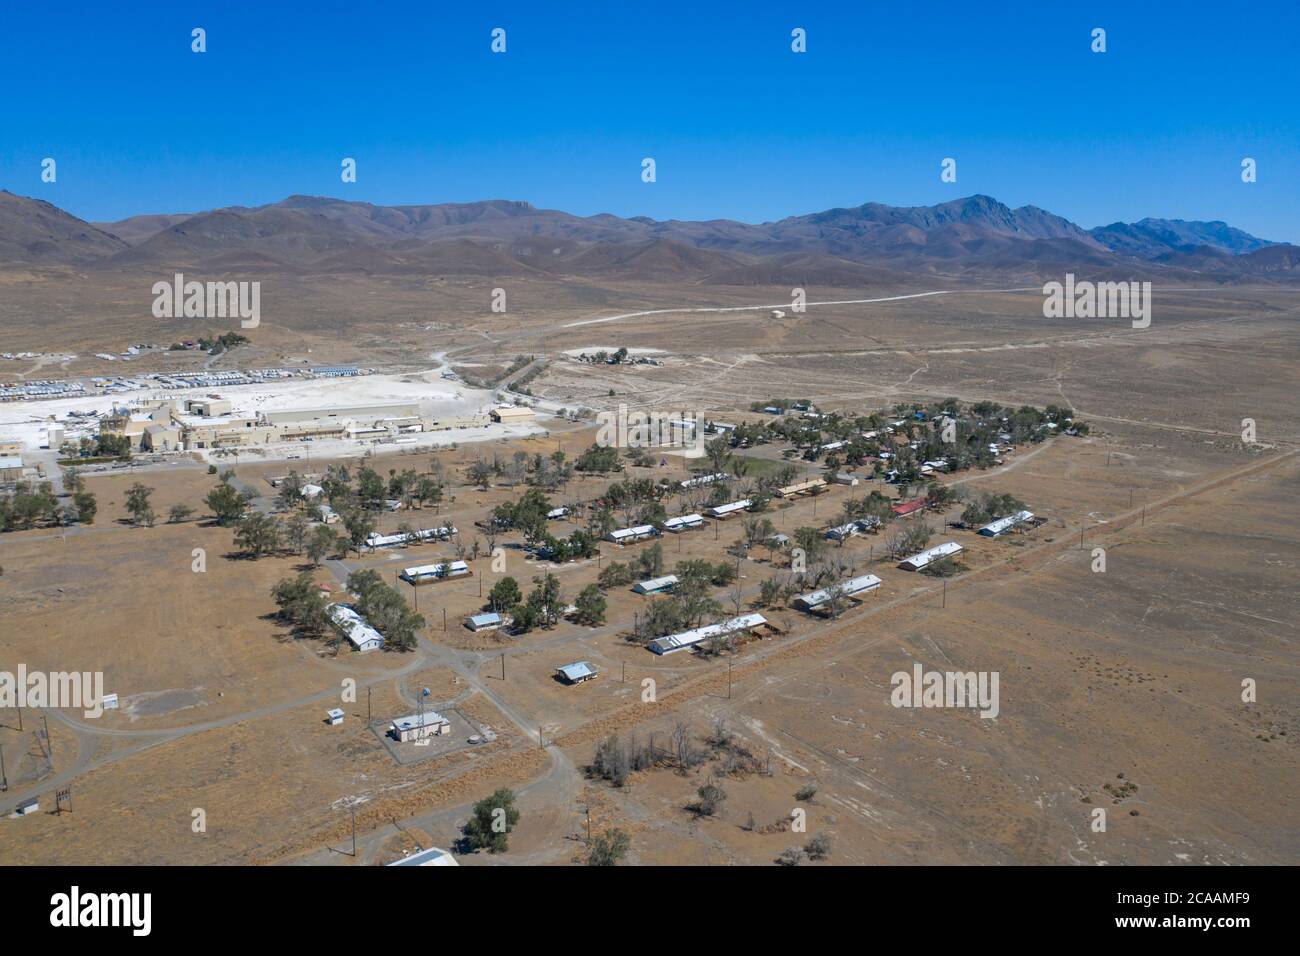 EMPIRE, NEVADA, UNITED STATES - Jul 04, 2020: A photo of Empire Mining Company's gypsum mine and company town property in the town of Empire. Stock Photo